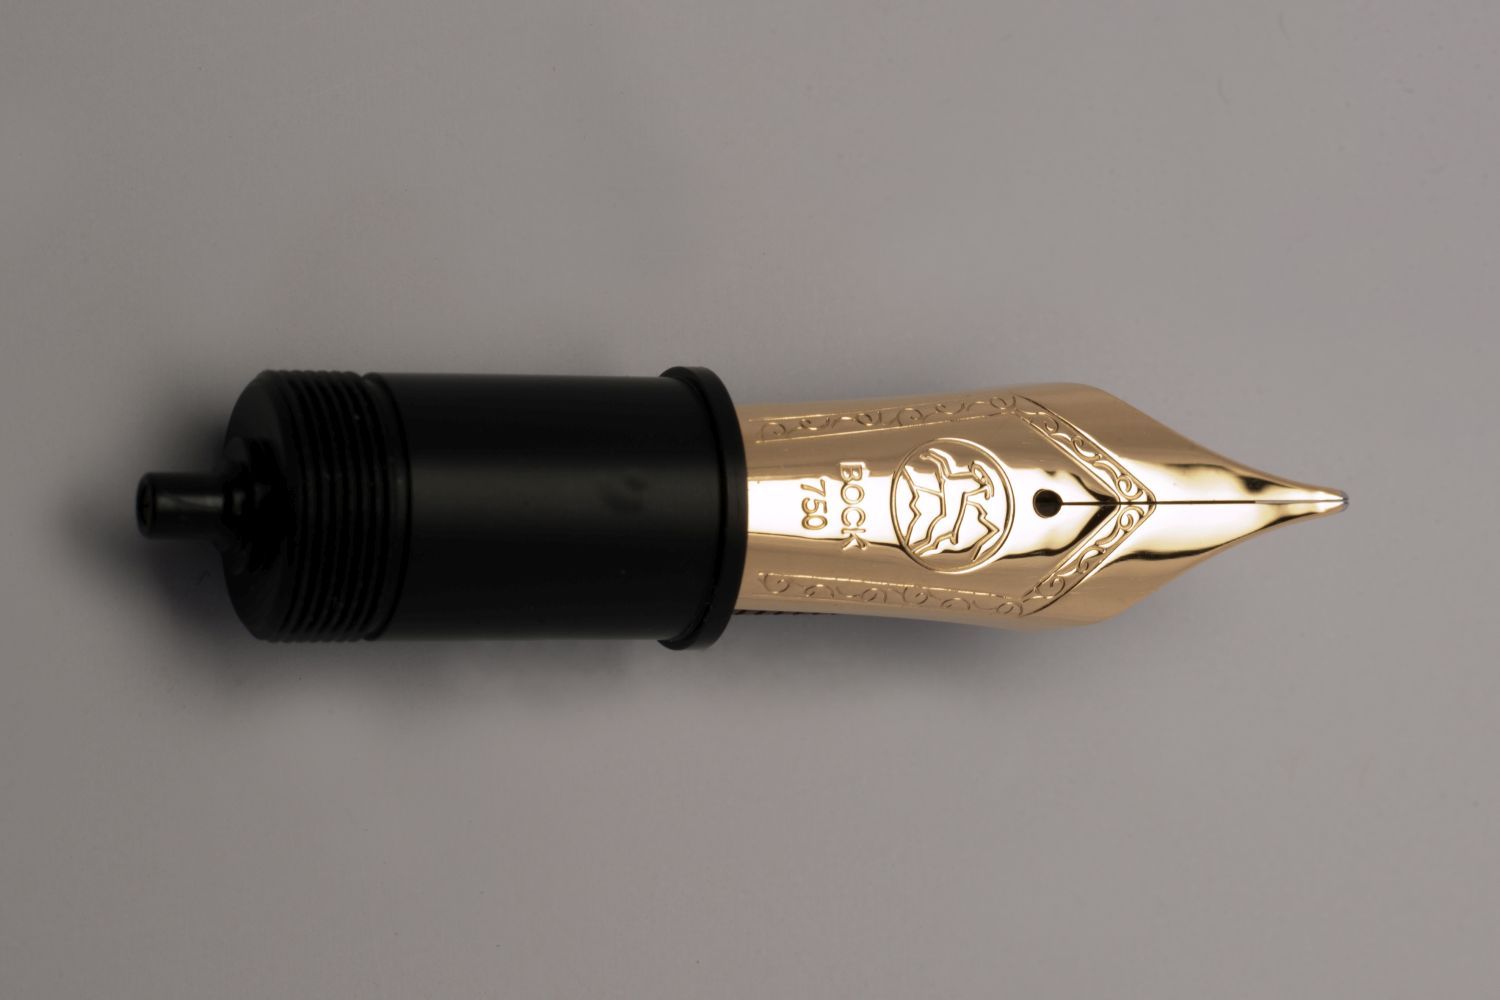 Extra-large nib, including an ink-feed system